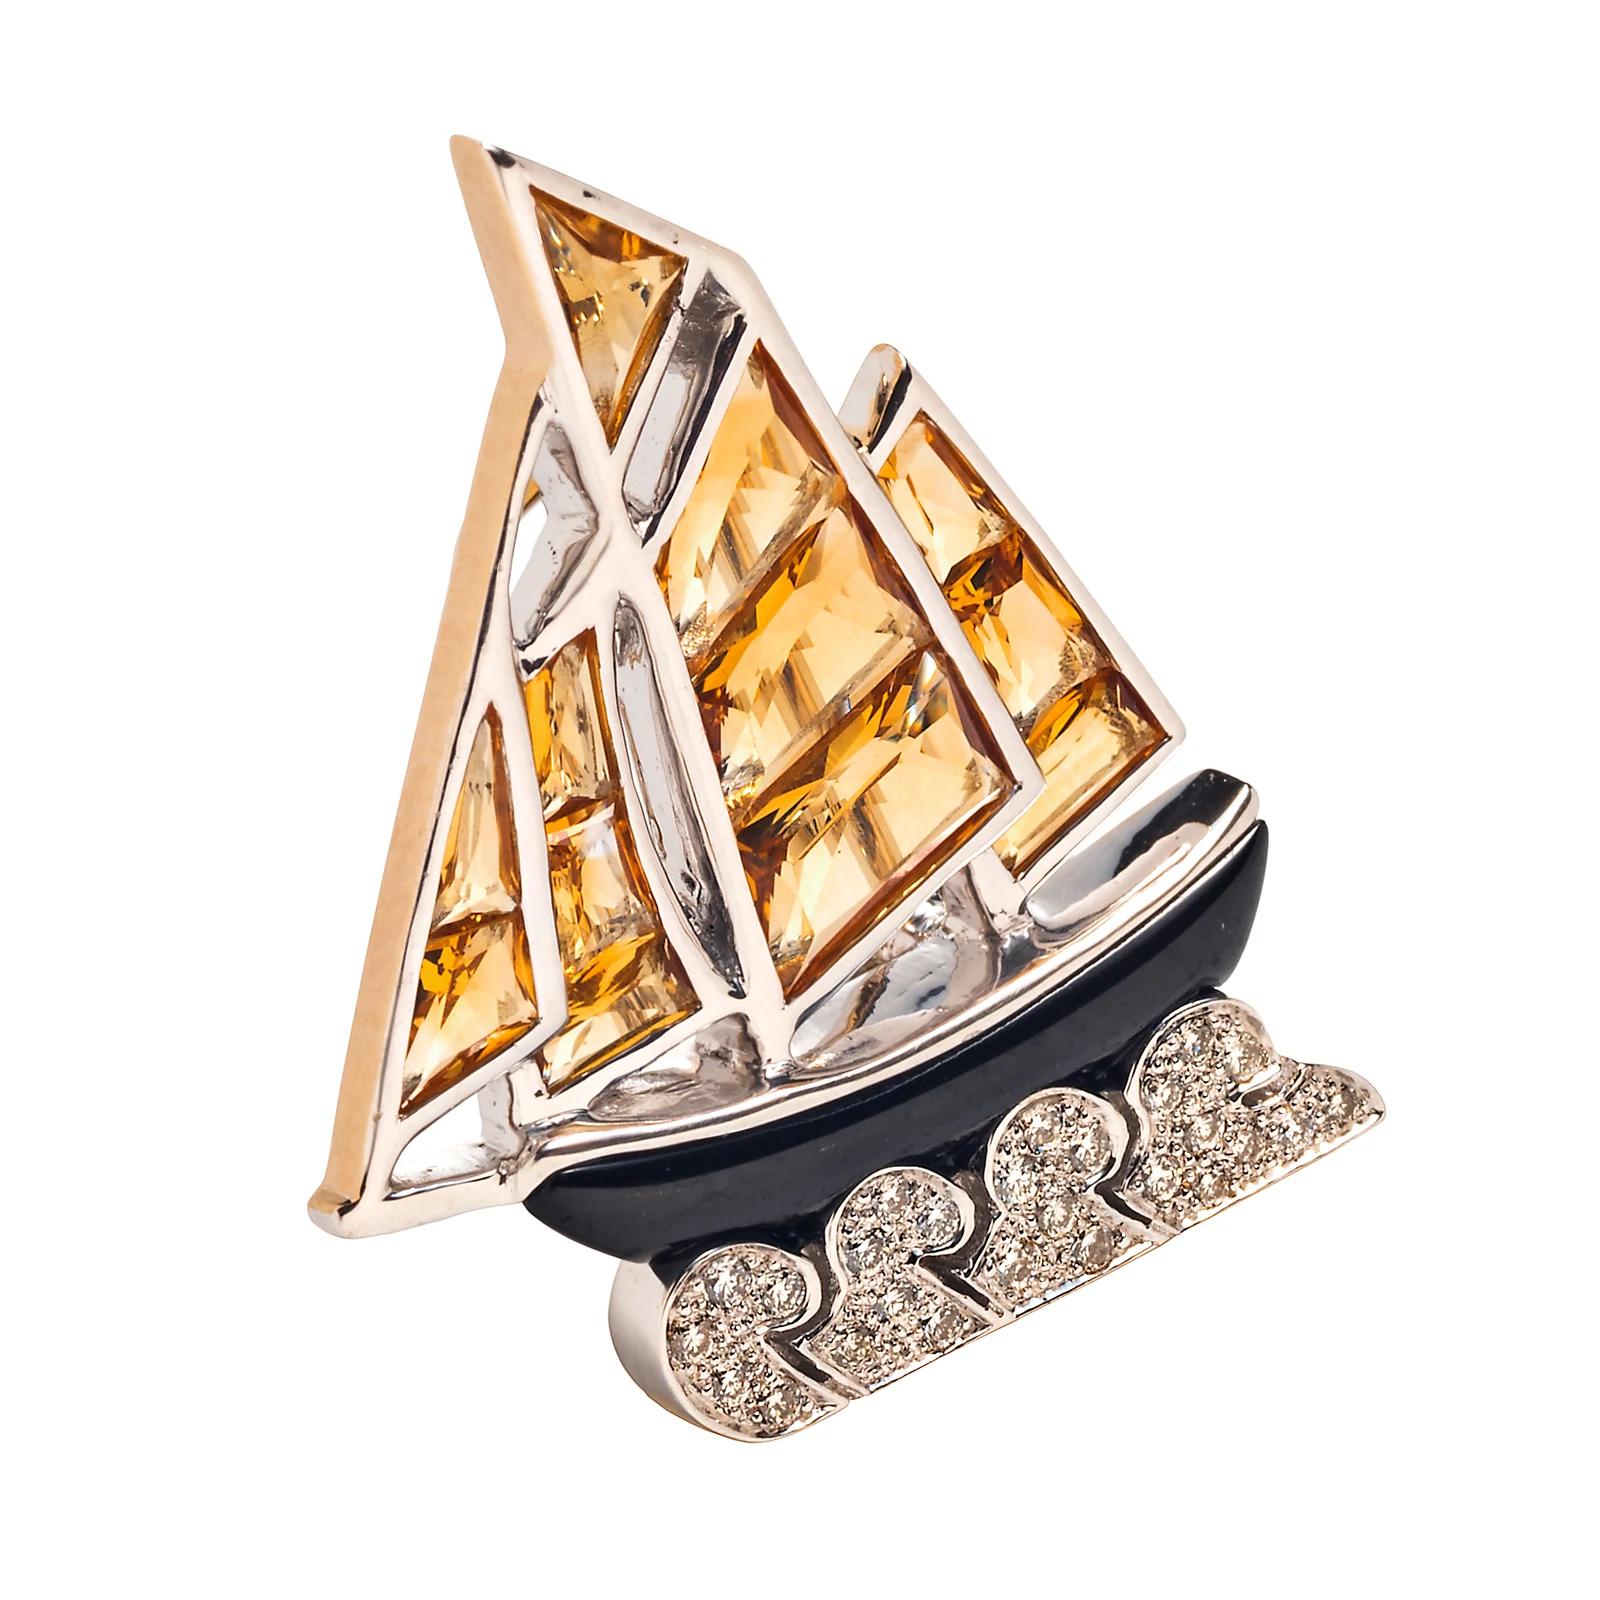 Knighthood White and Gold Sail Boat Lapel Pin for Men and Women LP-45 